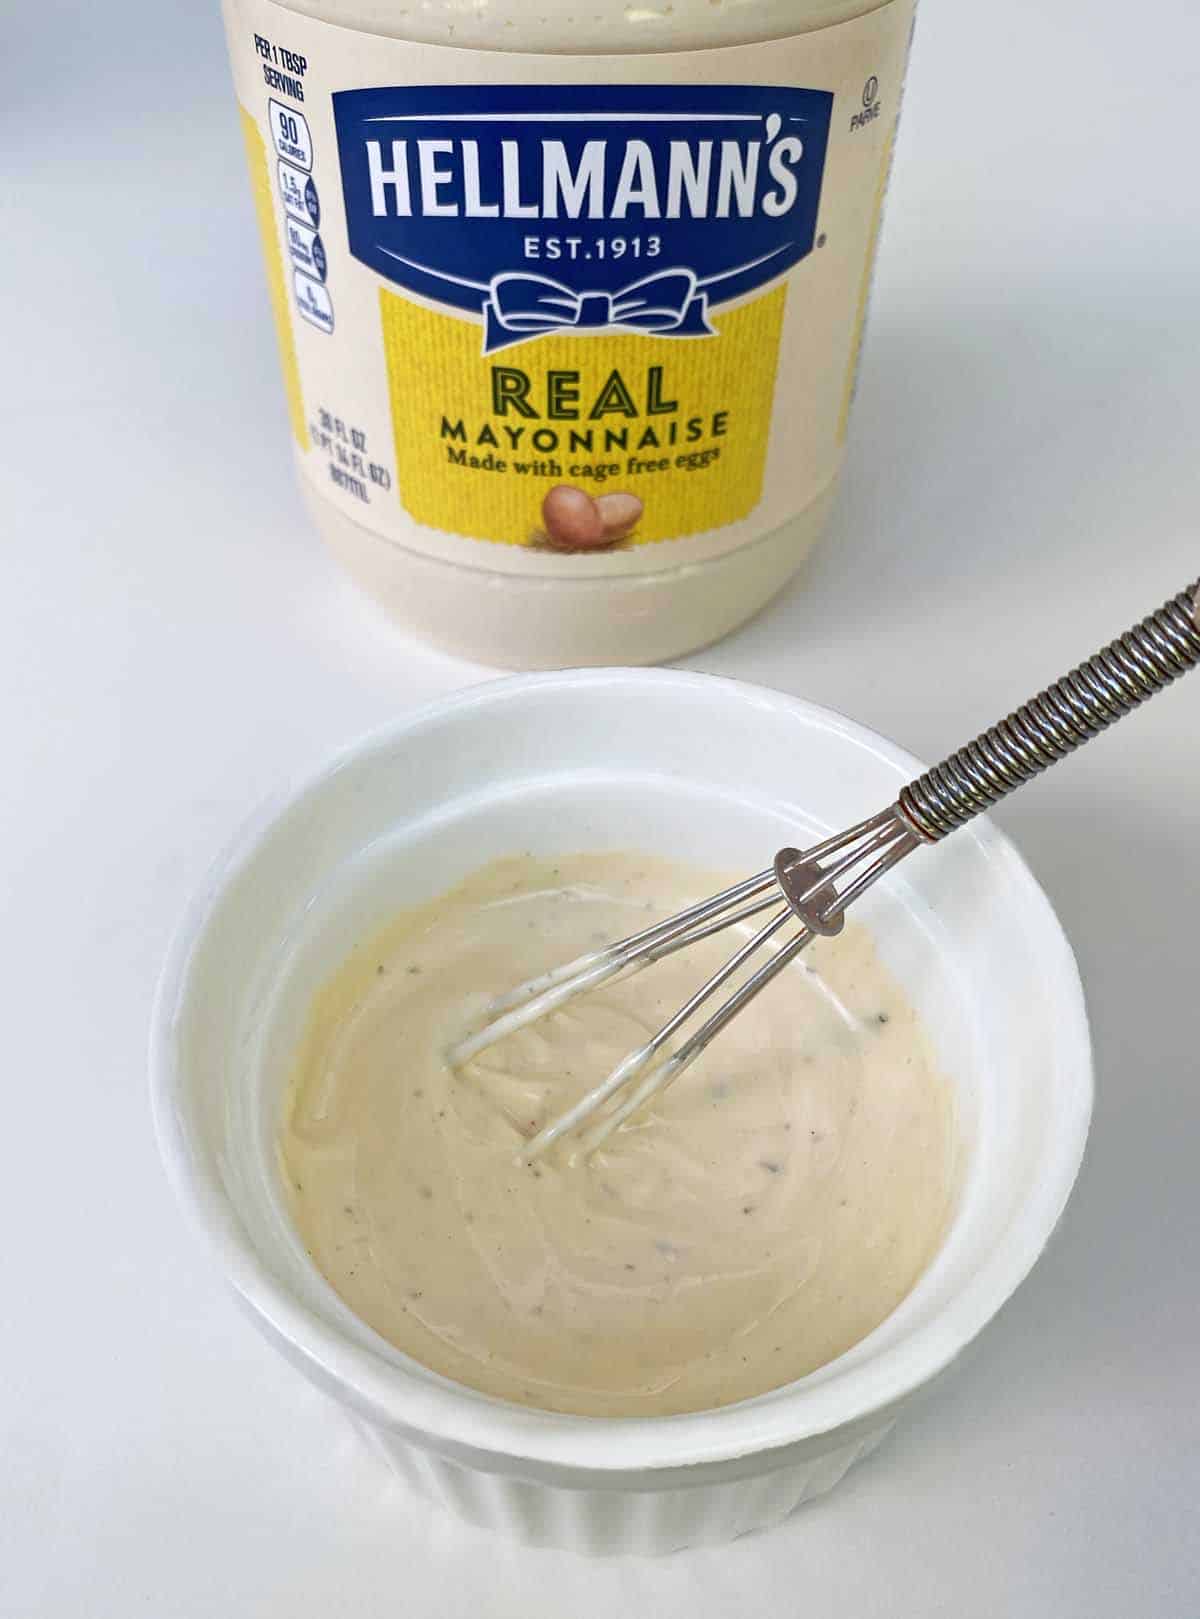 whisking ingredients for ranch balsamic mayo in a small white bowl, with Hellman's mayonnaise behind.